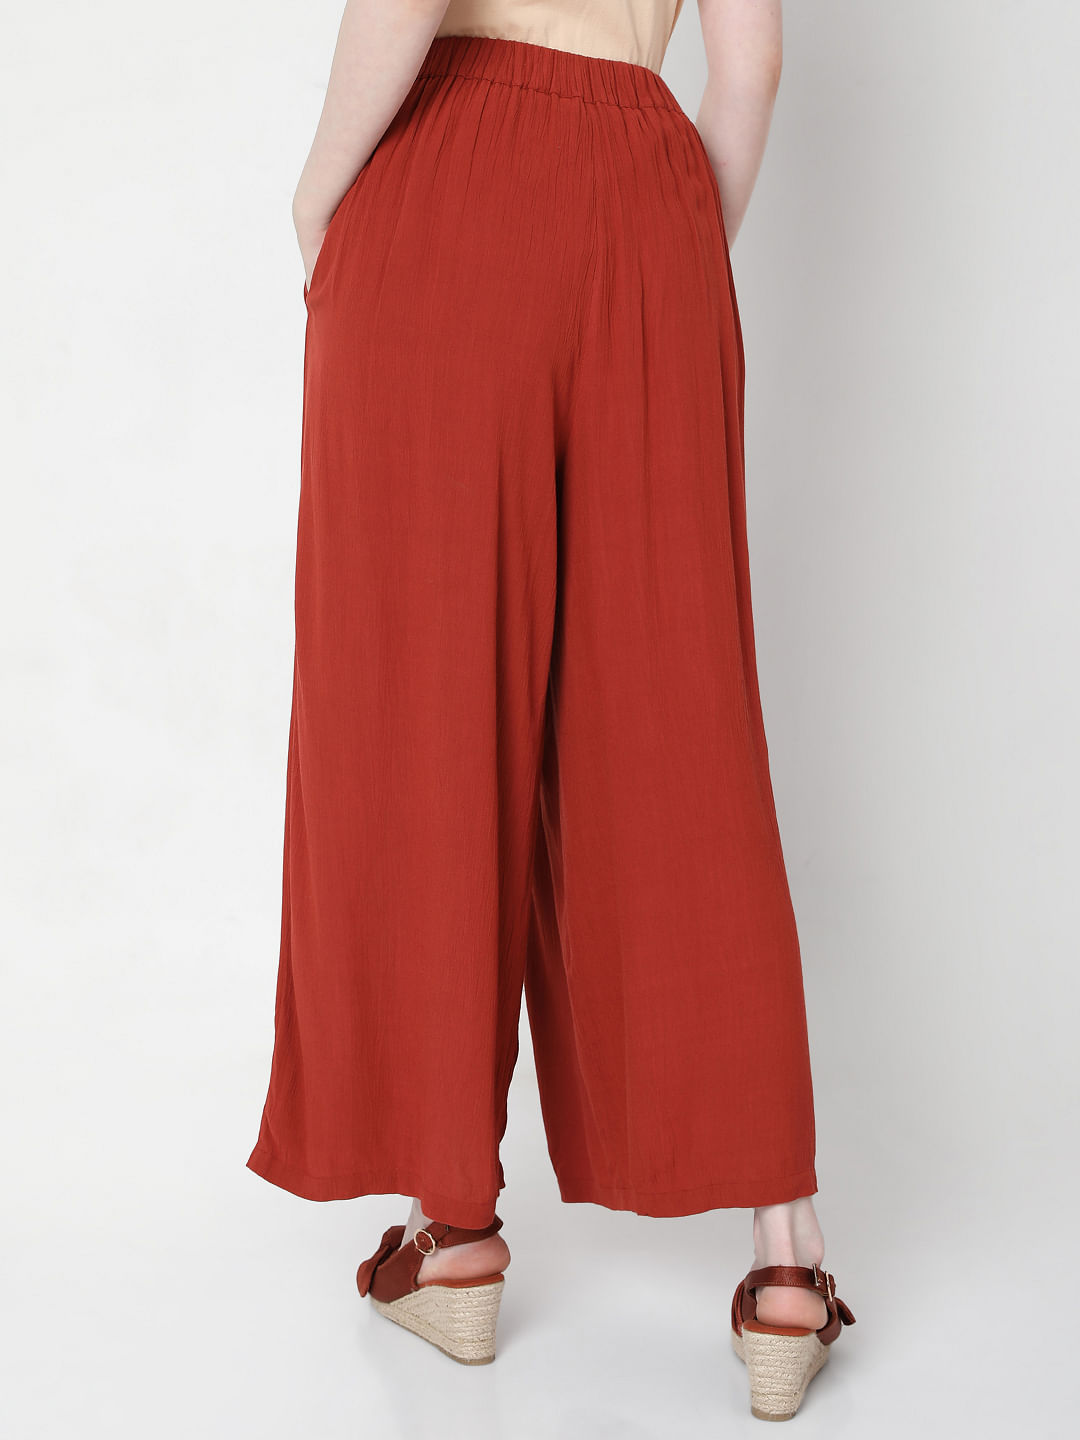 Palazzo Pant Online: Buy Palazzo Pant For Women